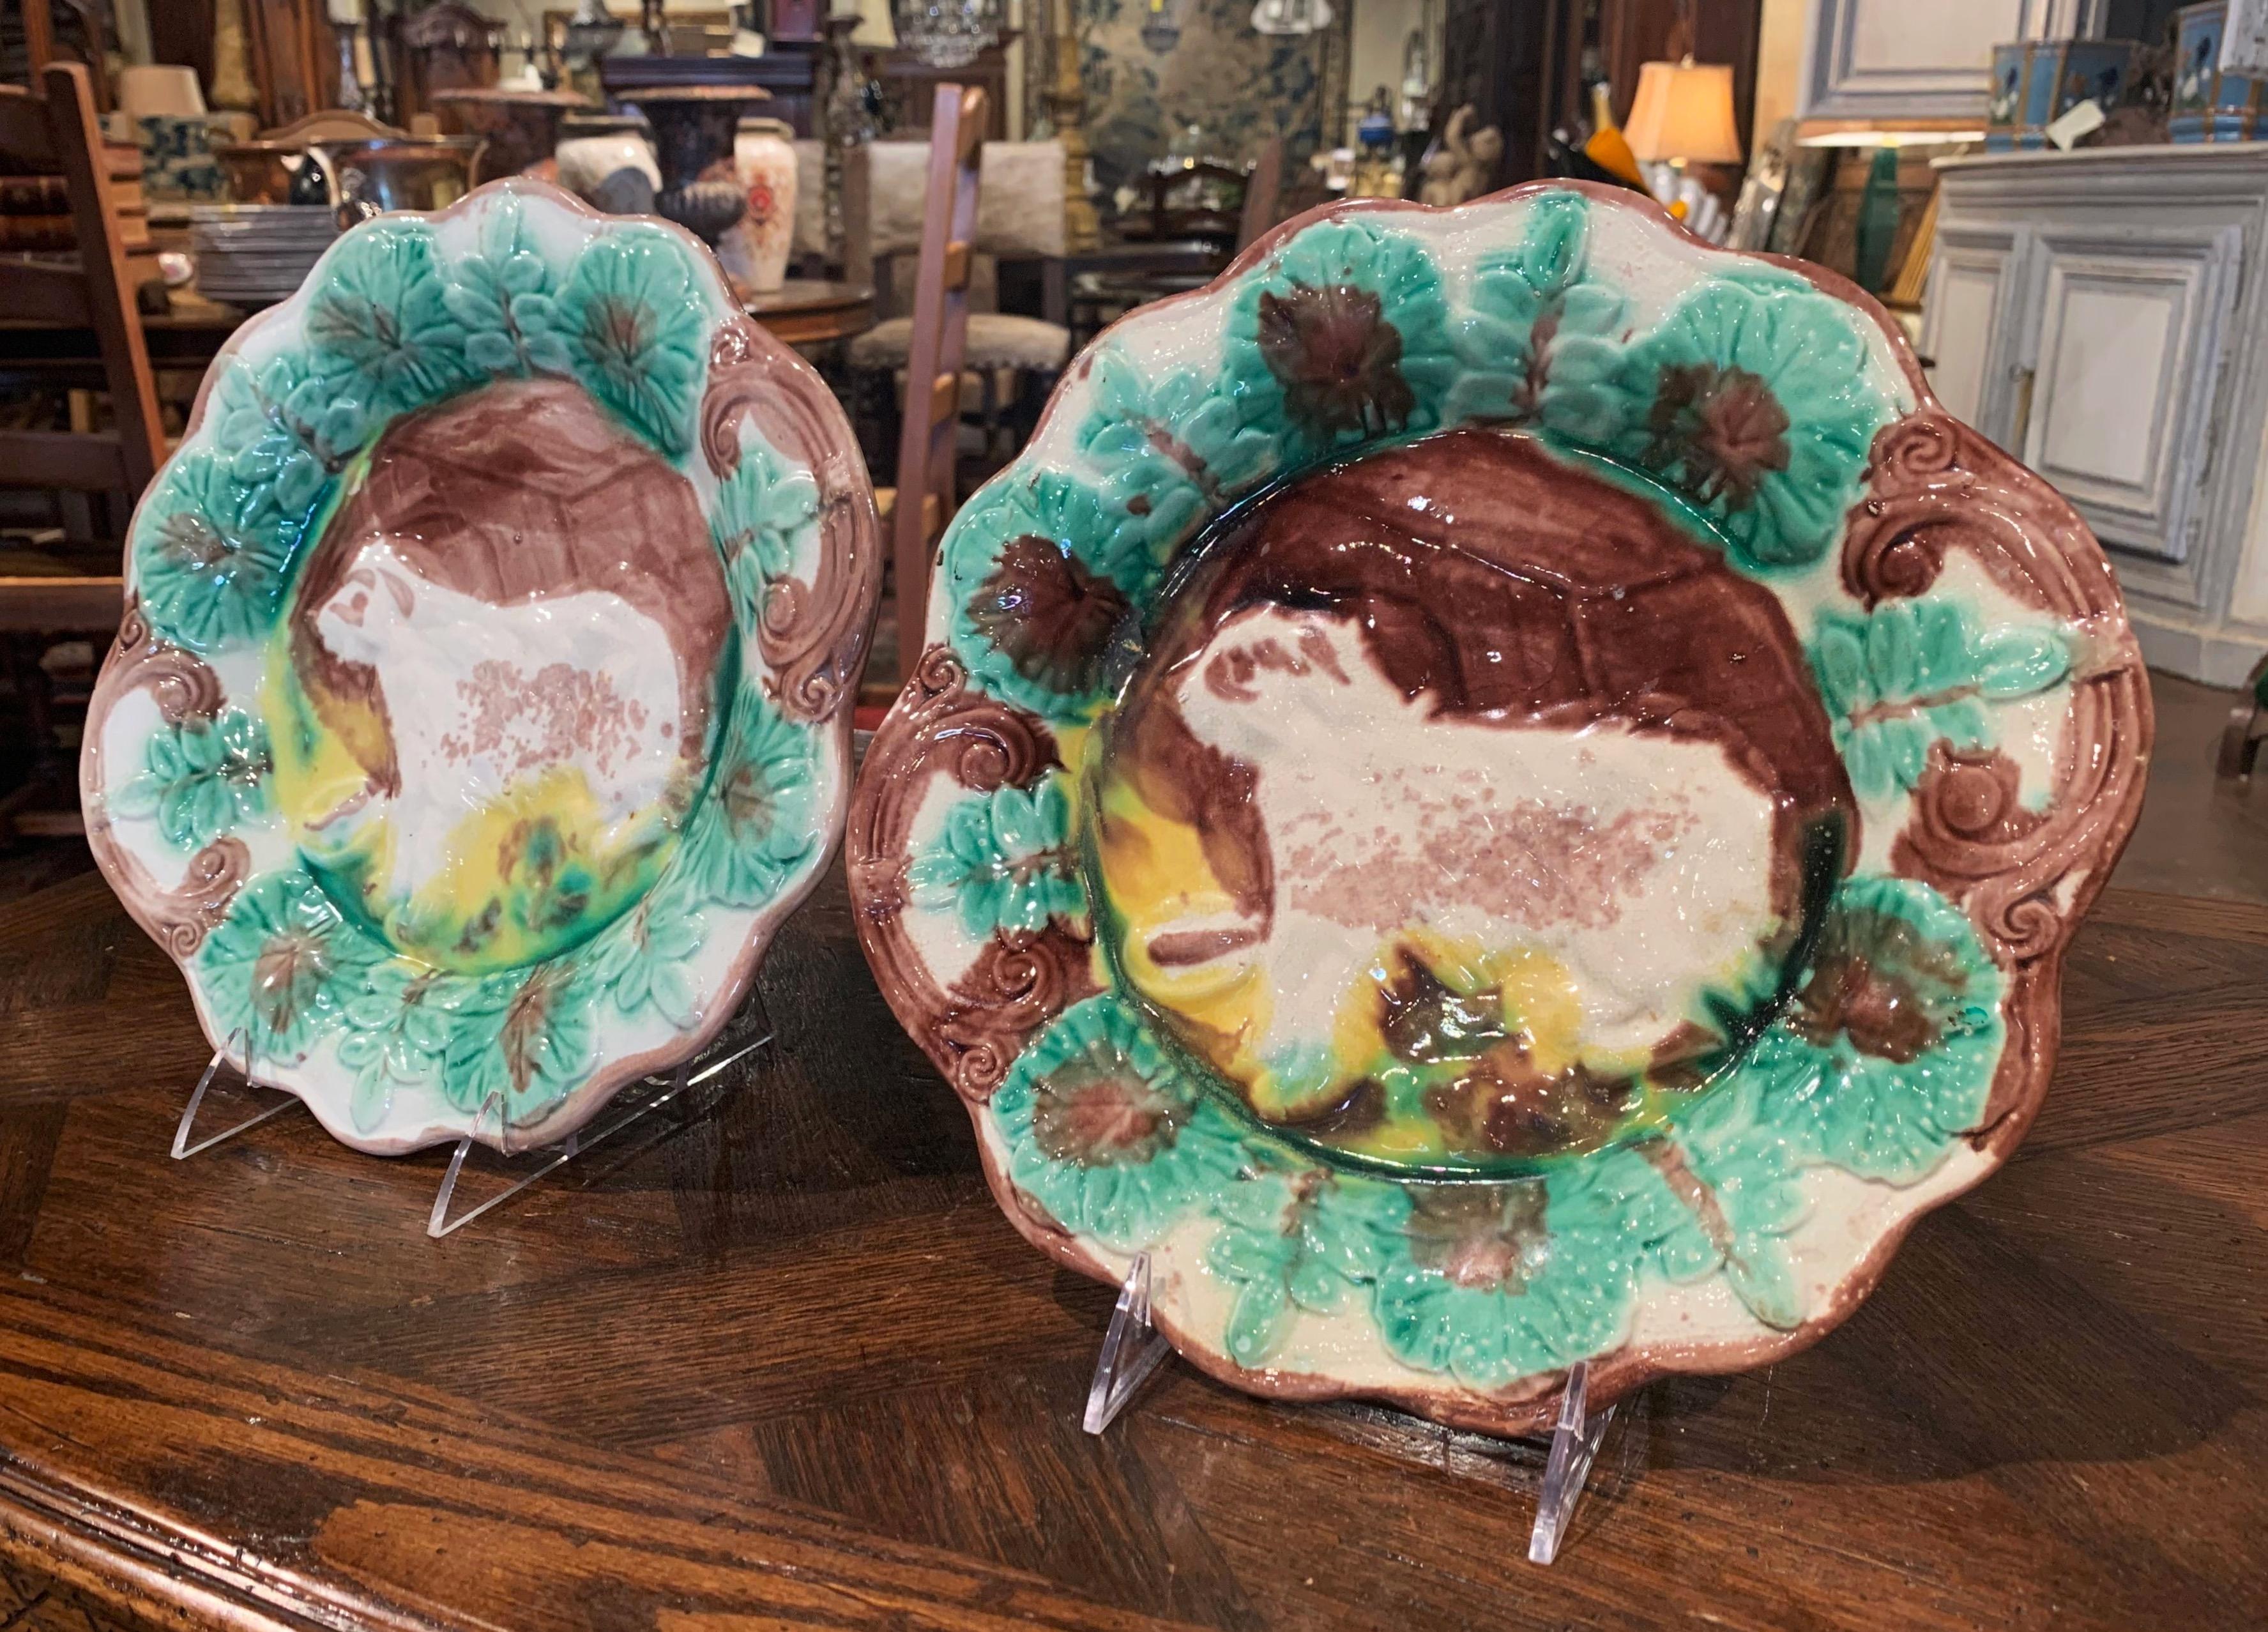 Decorate a kitchen wall with this colorful pair of antique ceramic platters, crafted in France circa 1930, each Majolica plate with a scalloped edge around the rim features leaf decor and embellished with a dog figure in relief in the center. The